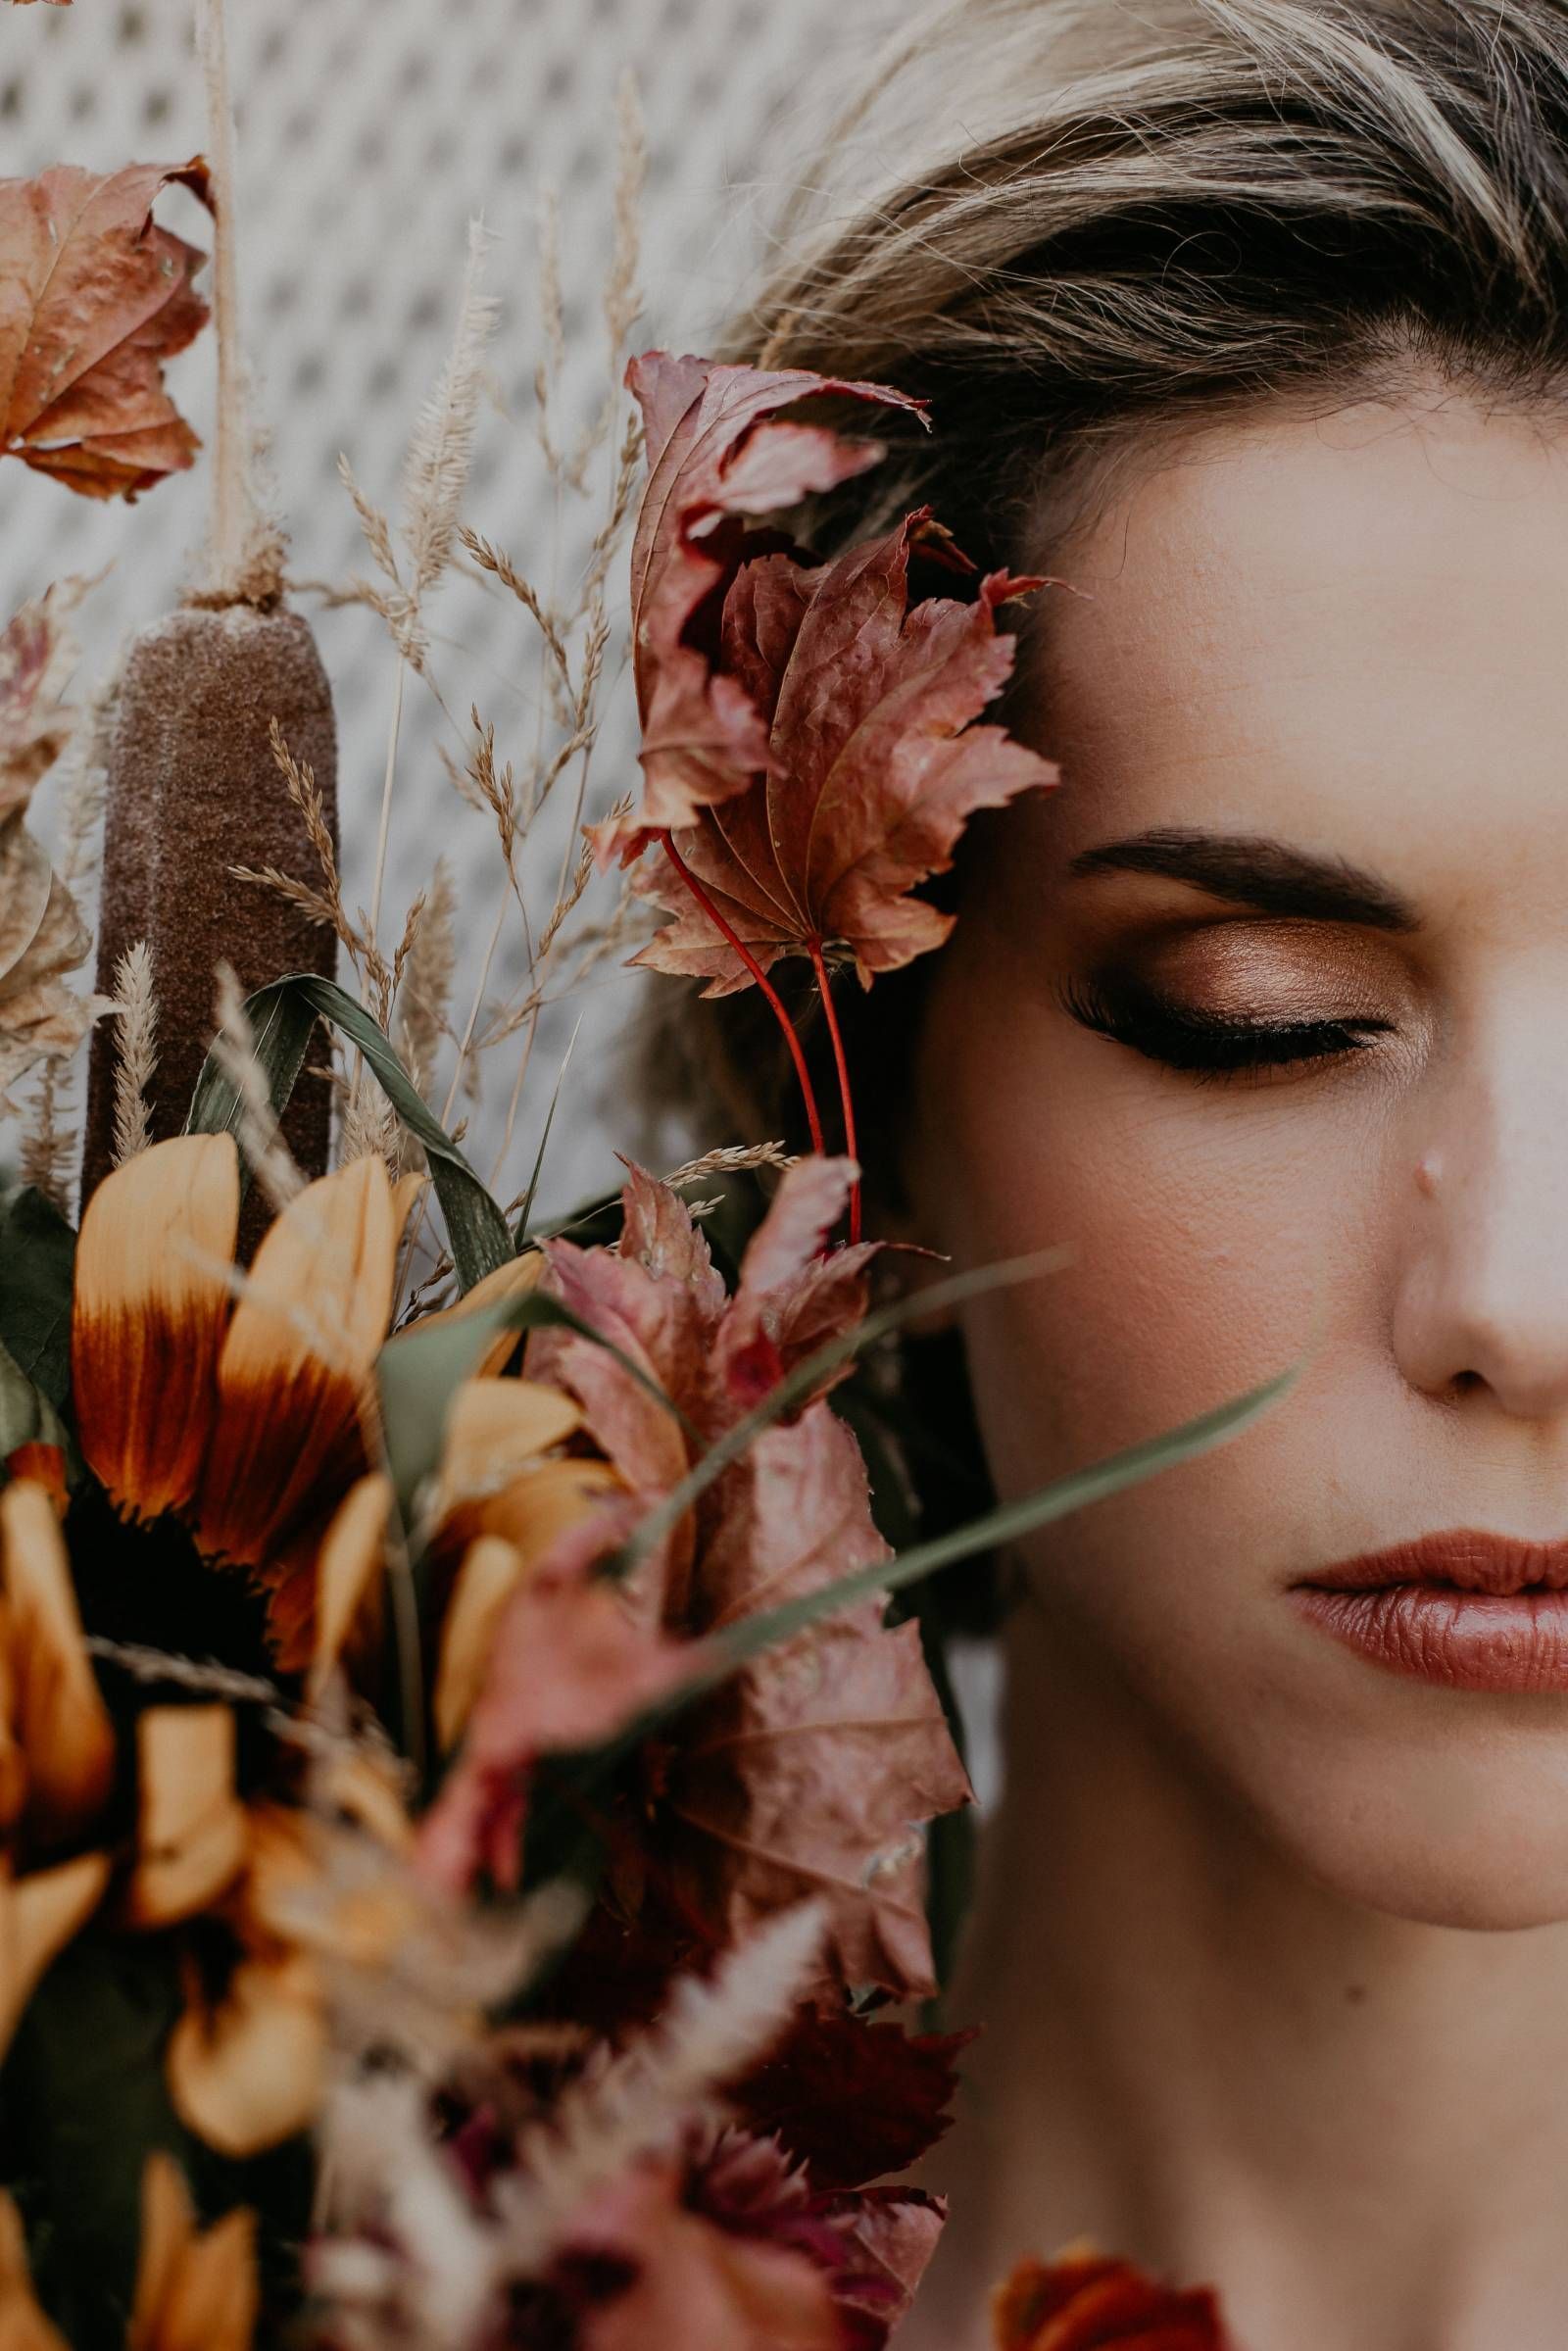 Fall Harvest Styled Shoot |  South Lake Tahoe Real Wedding - Fall Harvest Styled Shoot |  South Lake Tahoe Real Wedding -   19 beauty Shoot wedding ideas